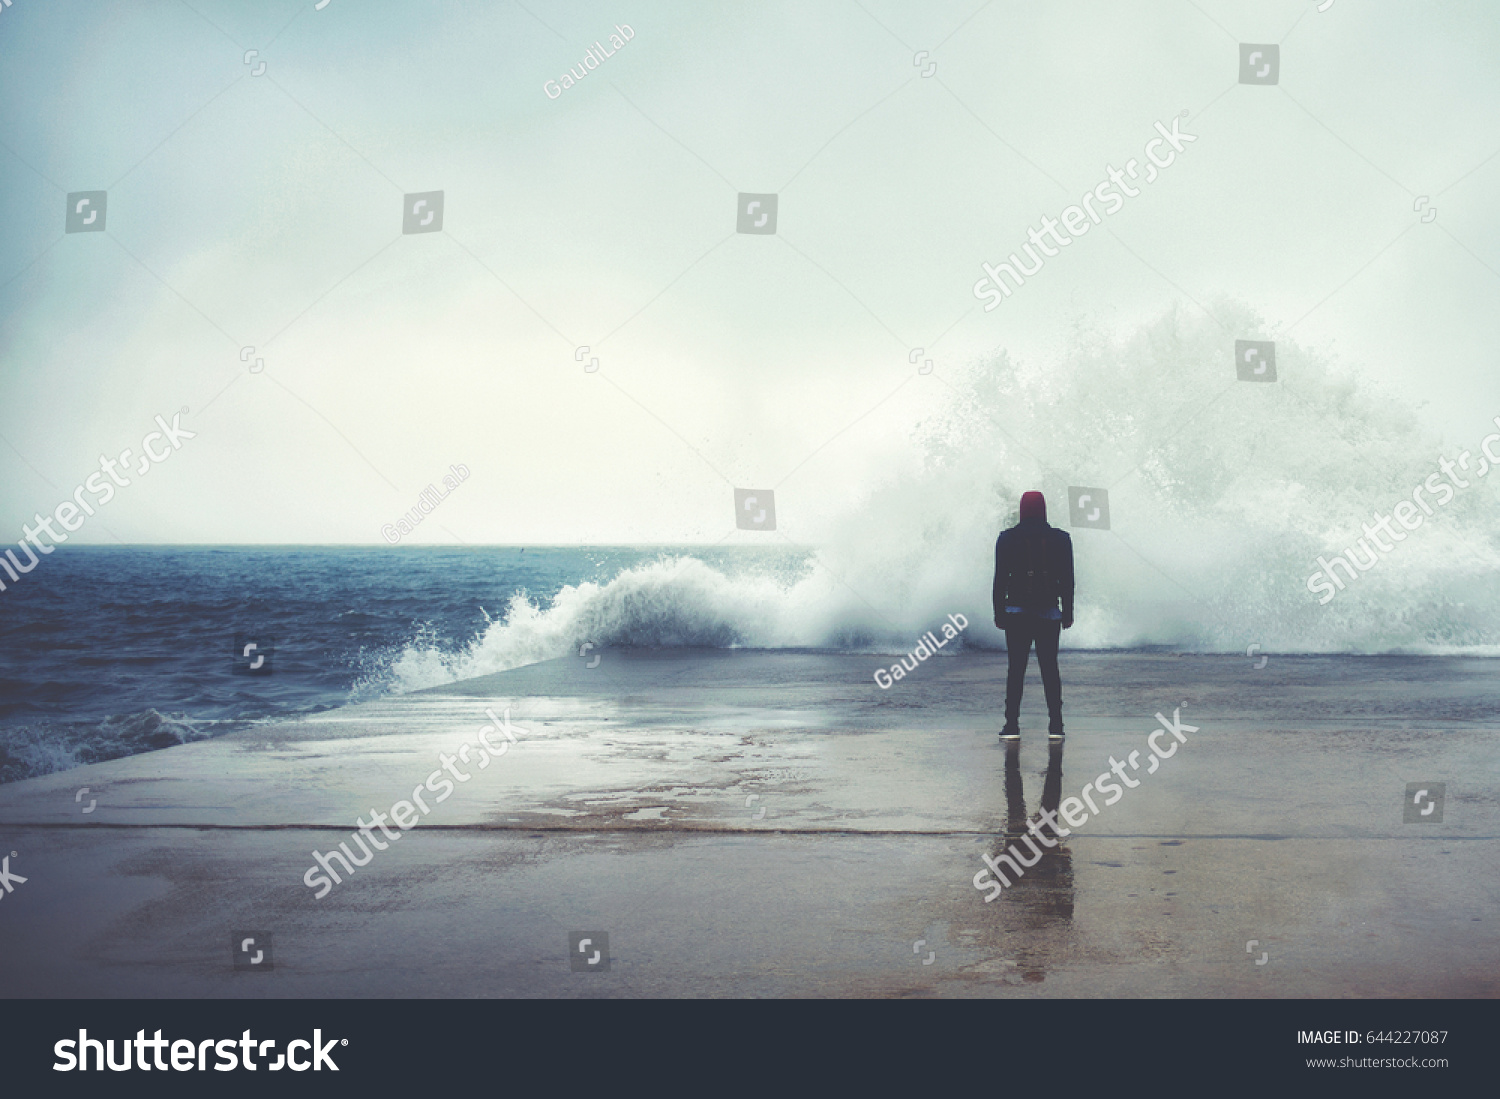 Feeling of freedom, back view of adult man standing on pier facing to the sea with big waves beats against the shore on a cloudy autumn day, alone depress person,the power of nature, storm on seashore #644227087